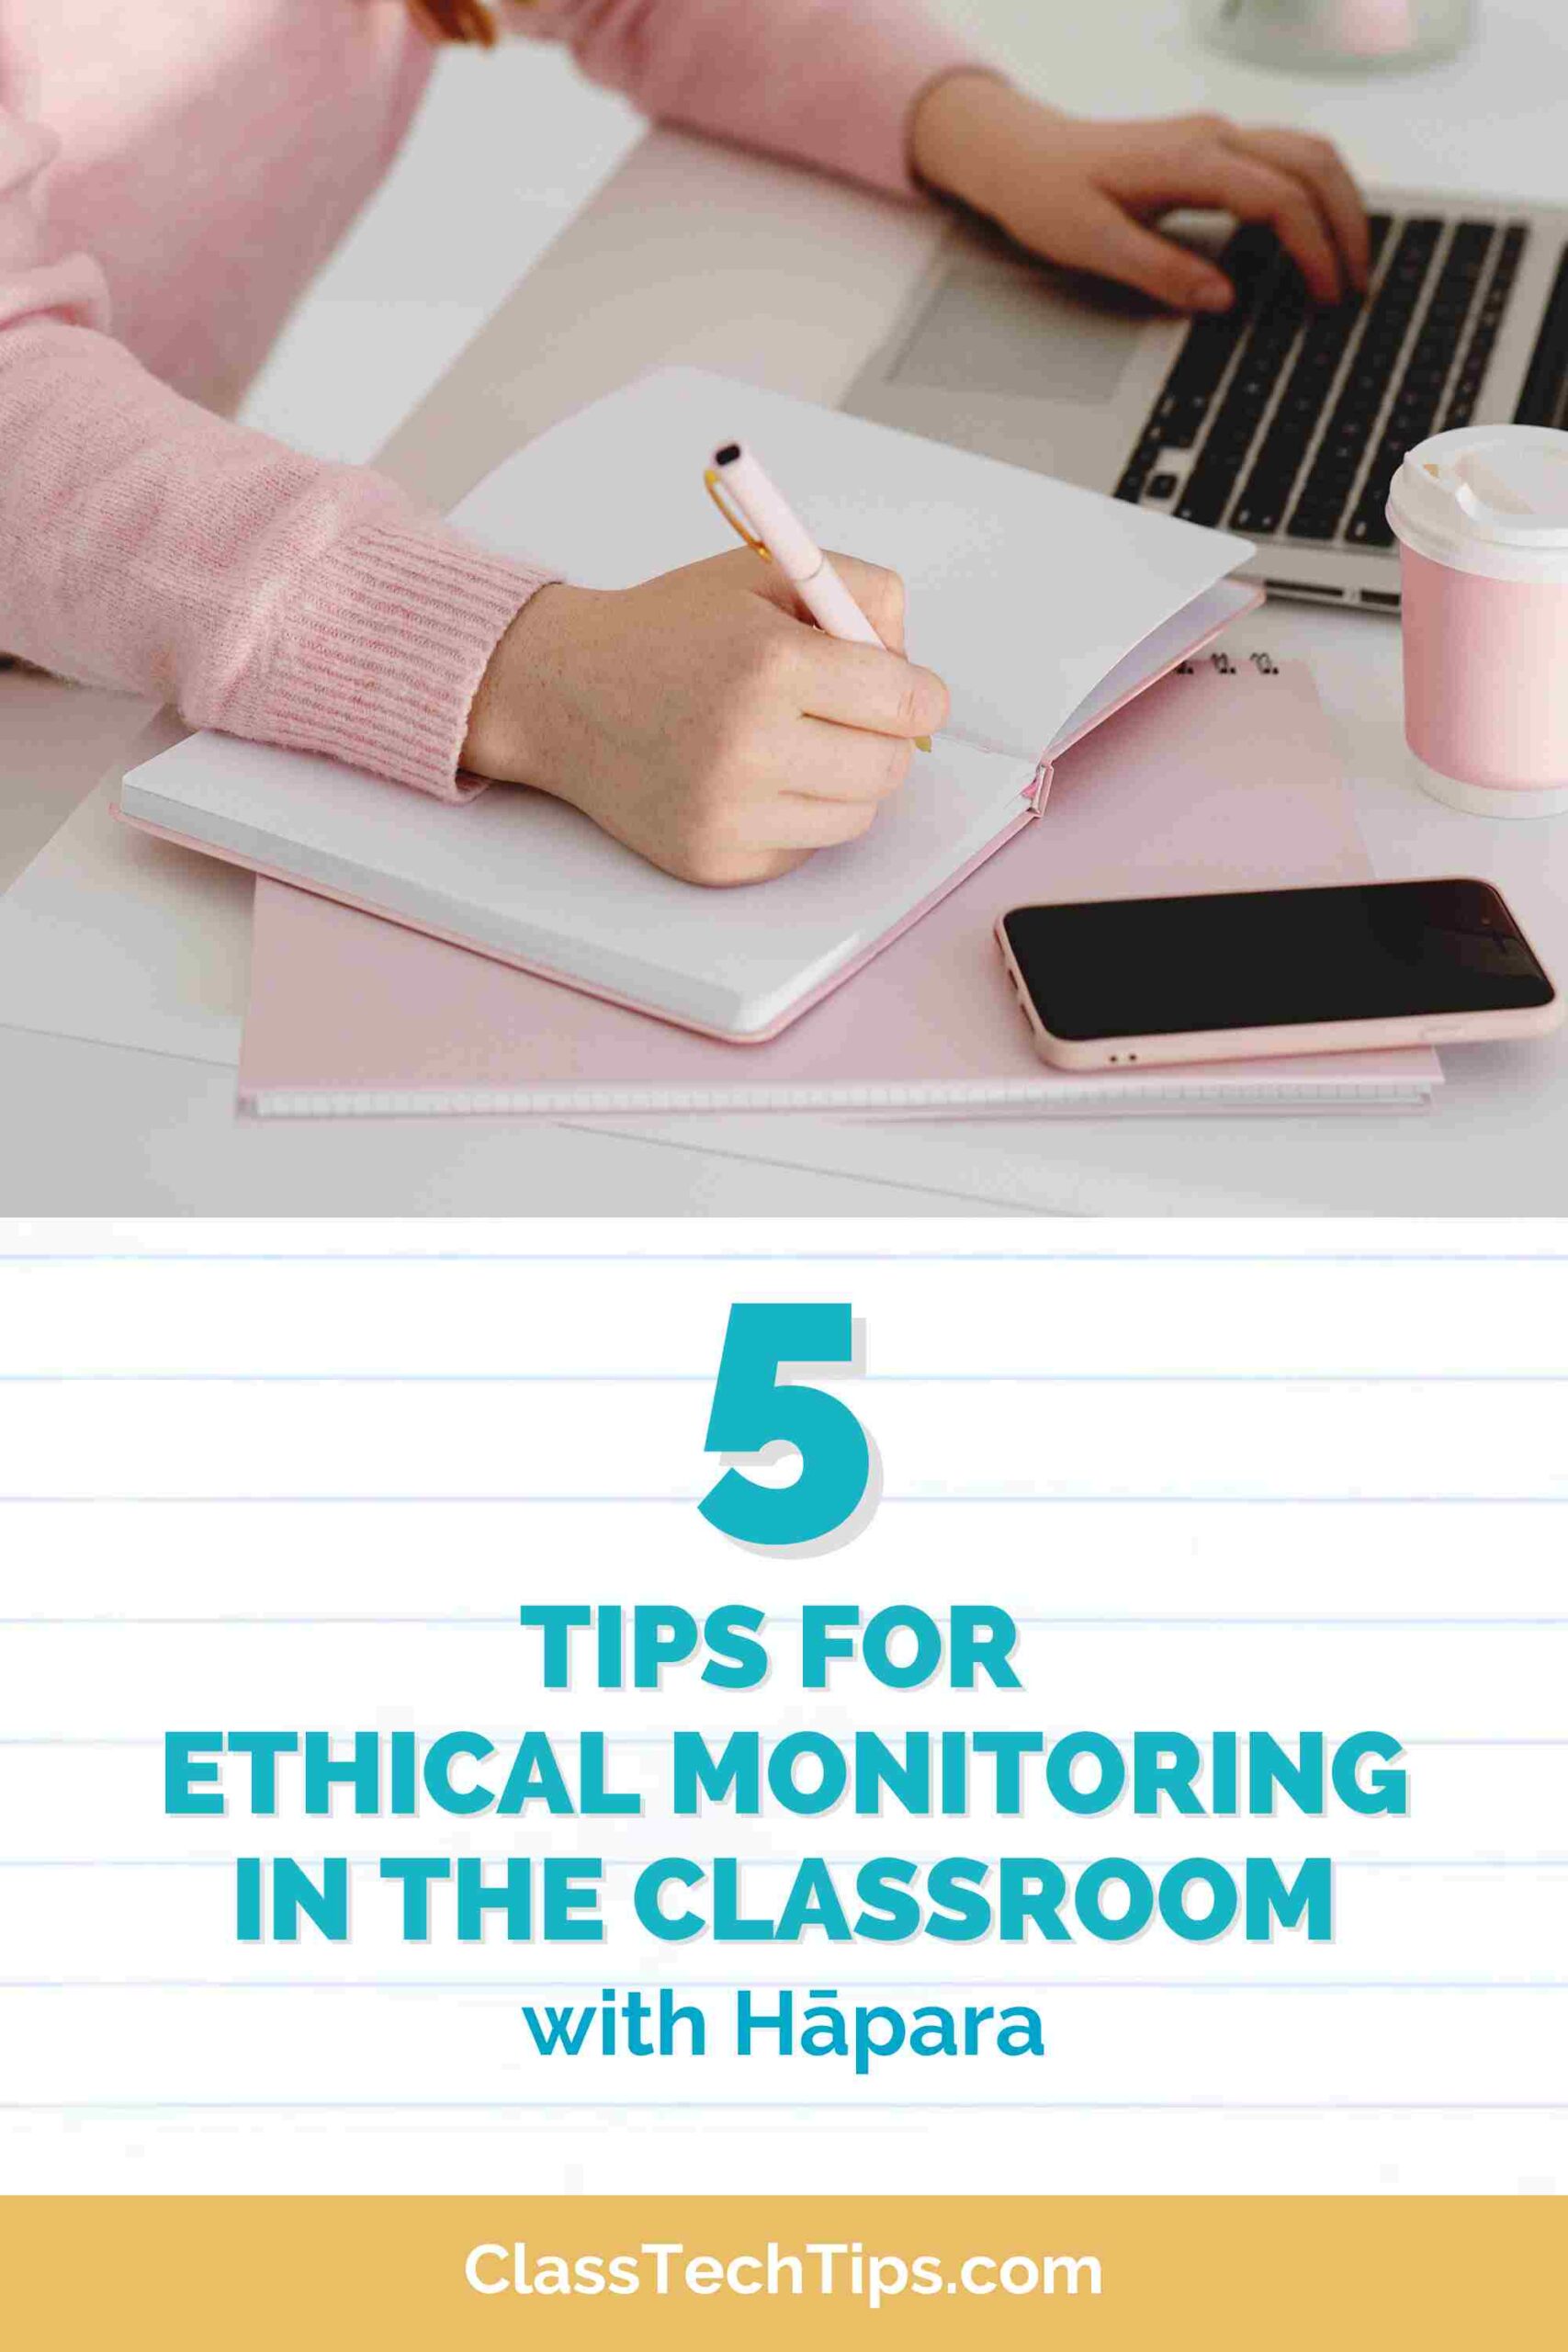 5 Ethical Monitoring Tips for the Classroom